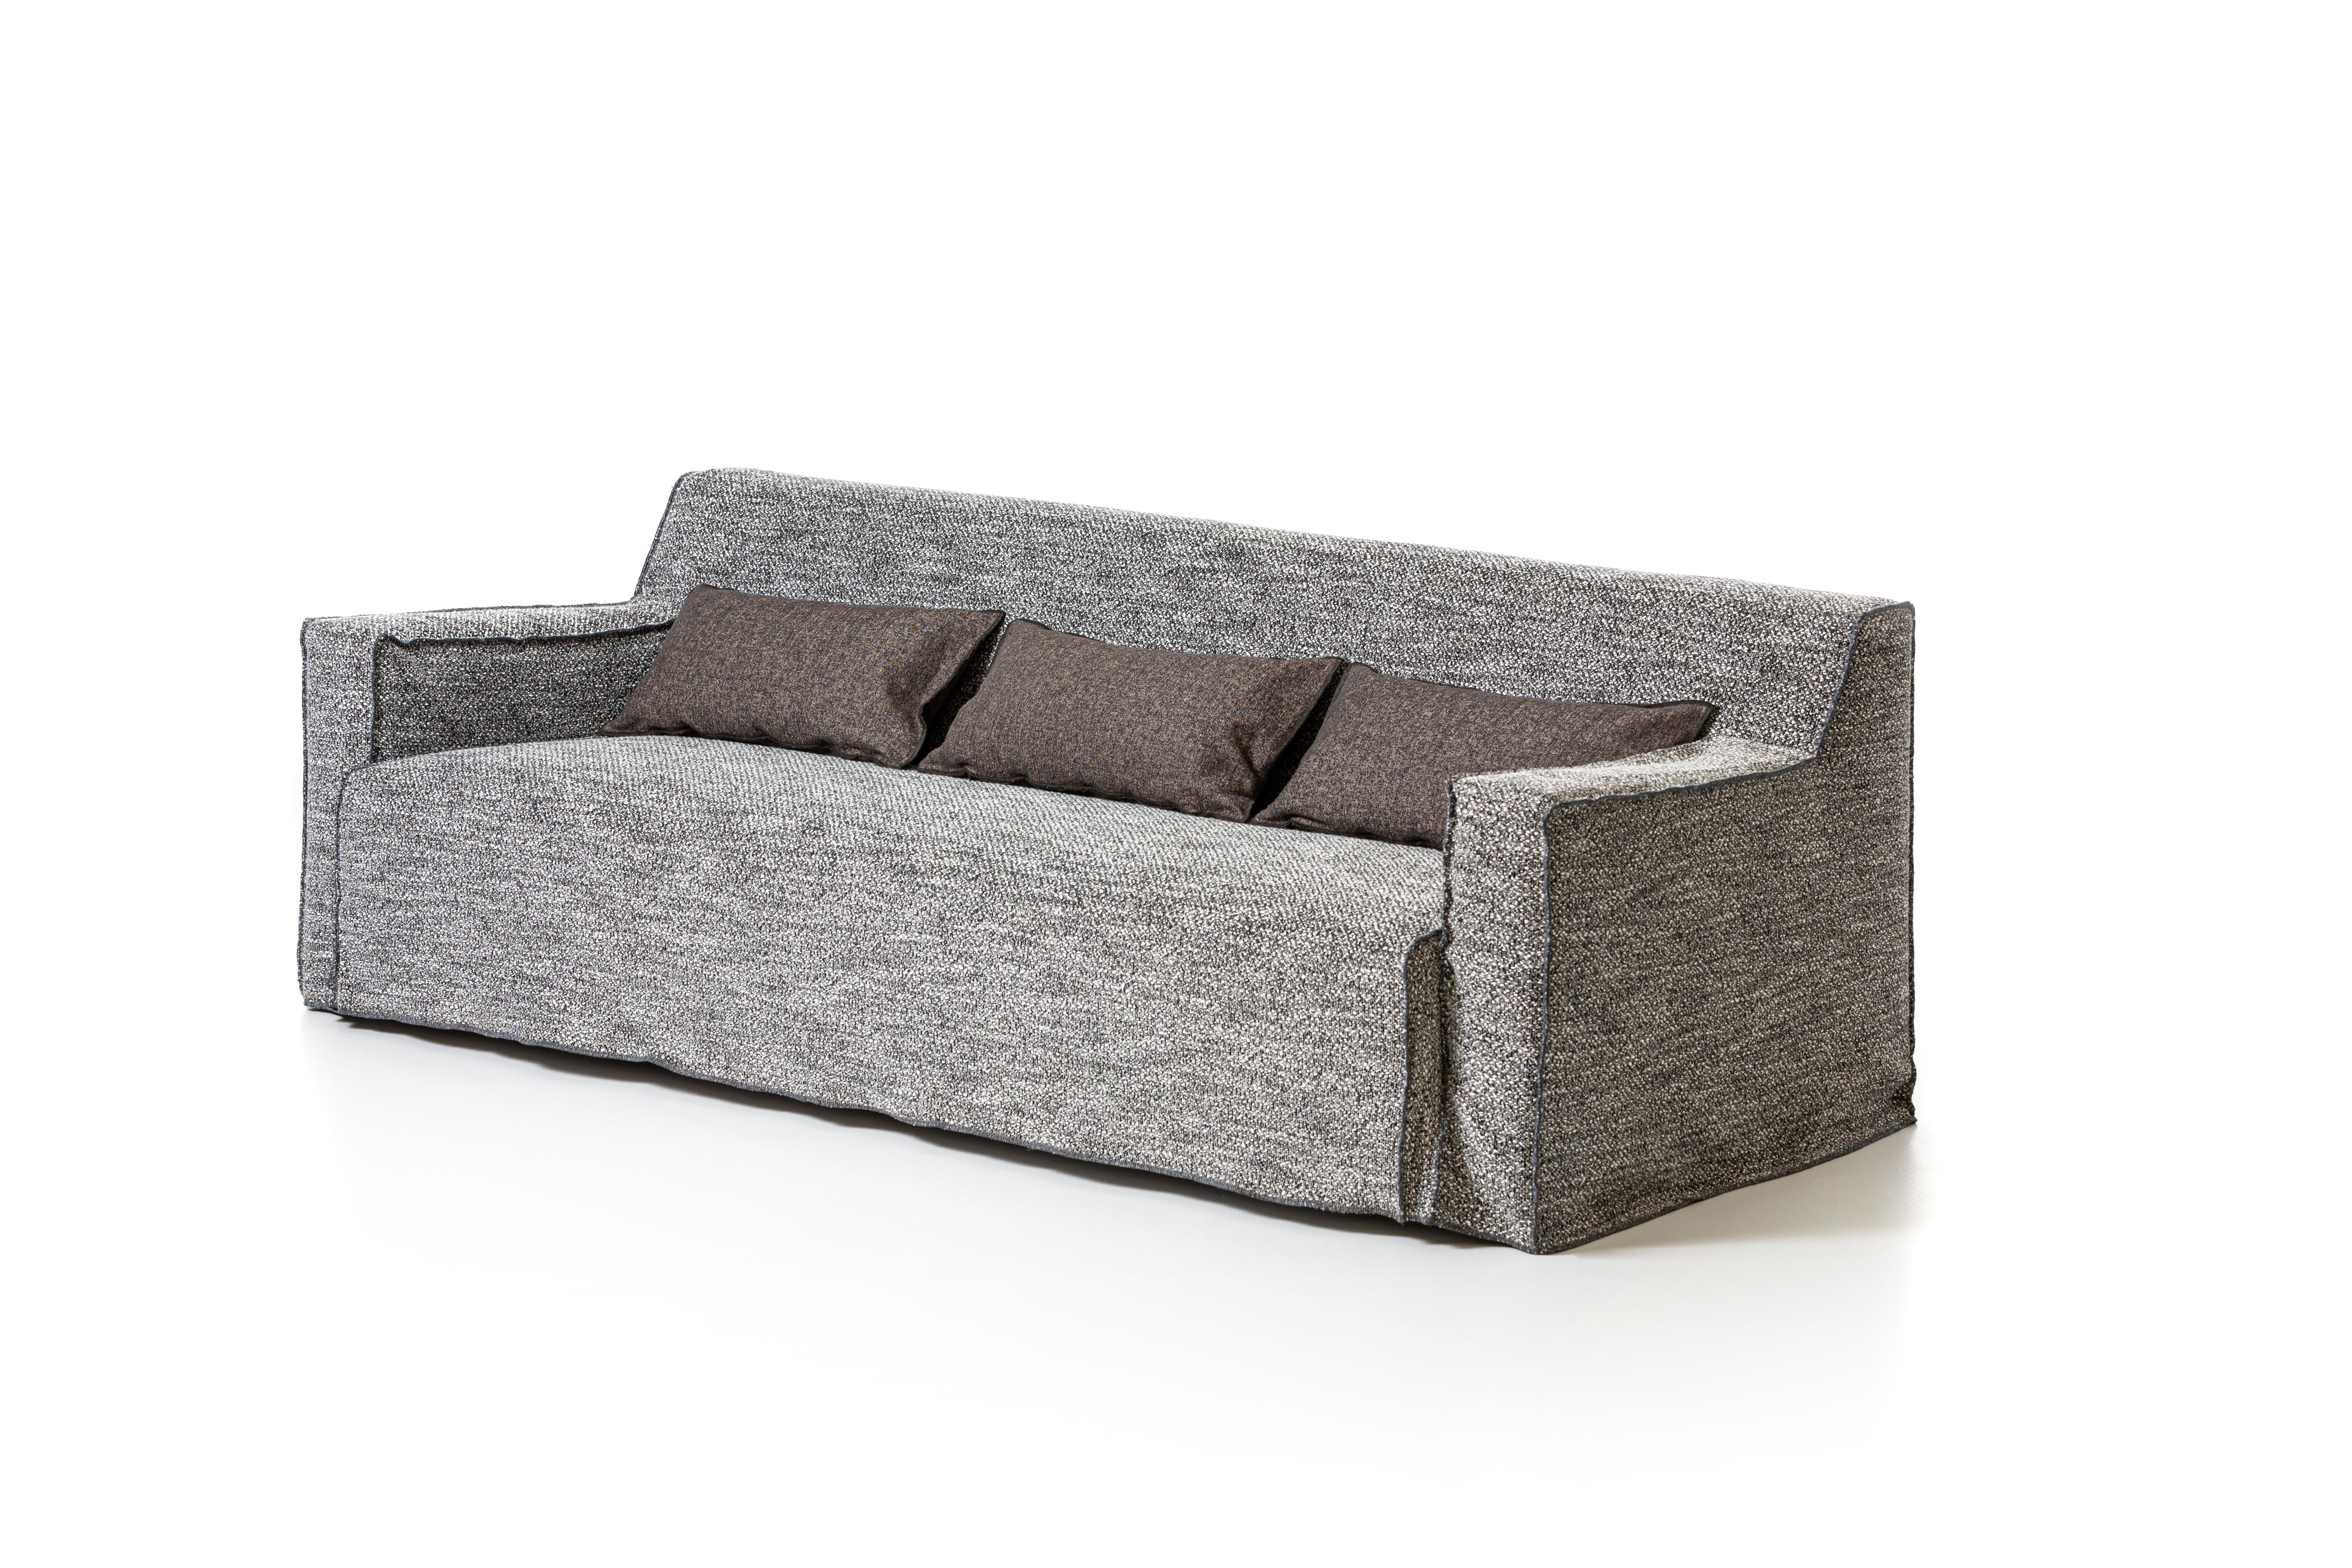 A family of modular elements, with or without armrests, gives life to the MORE modular upholstery system, which offers infinite configurations thanks to the collection’s different modules. Soft and generous volumes characterise these products with